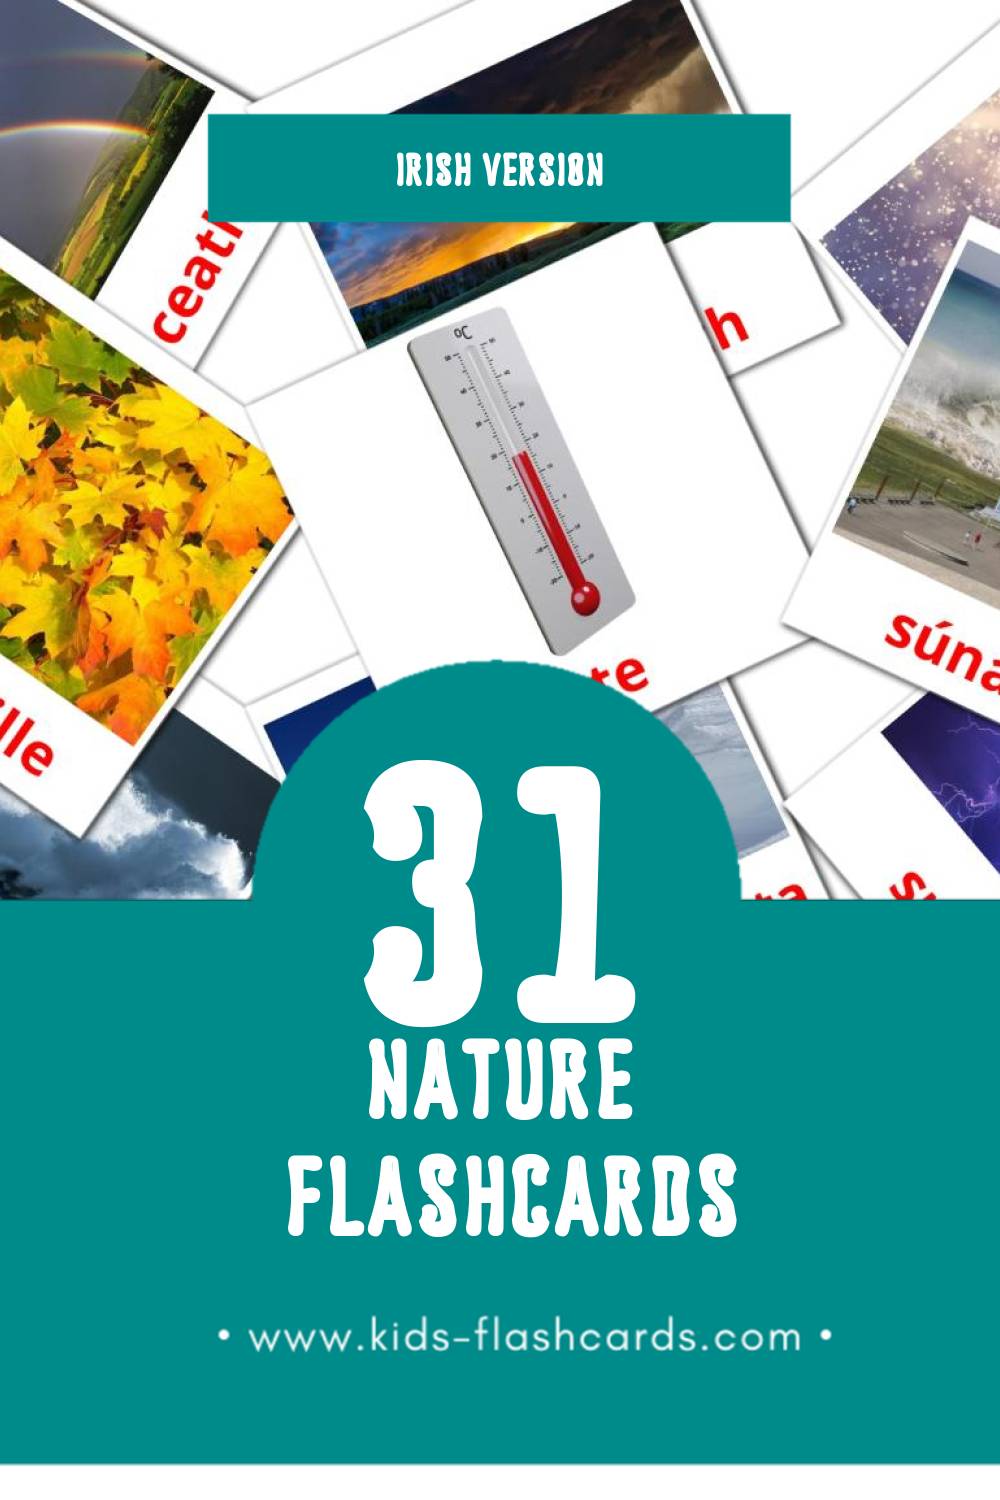 Visual Nádúr Flashcards for Toddlers (31 cards in Irish)